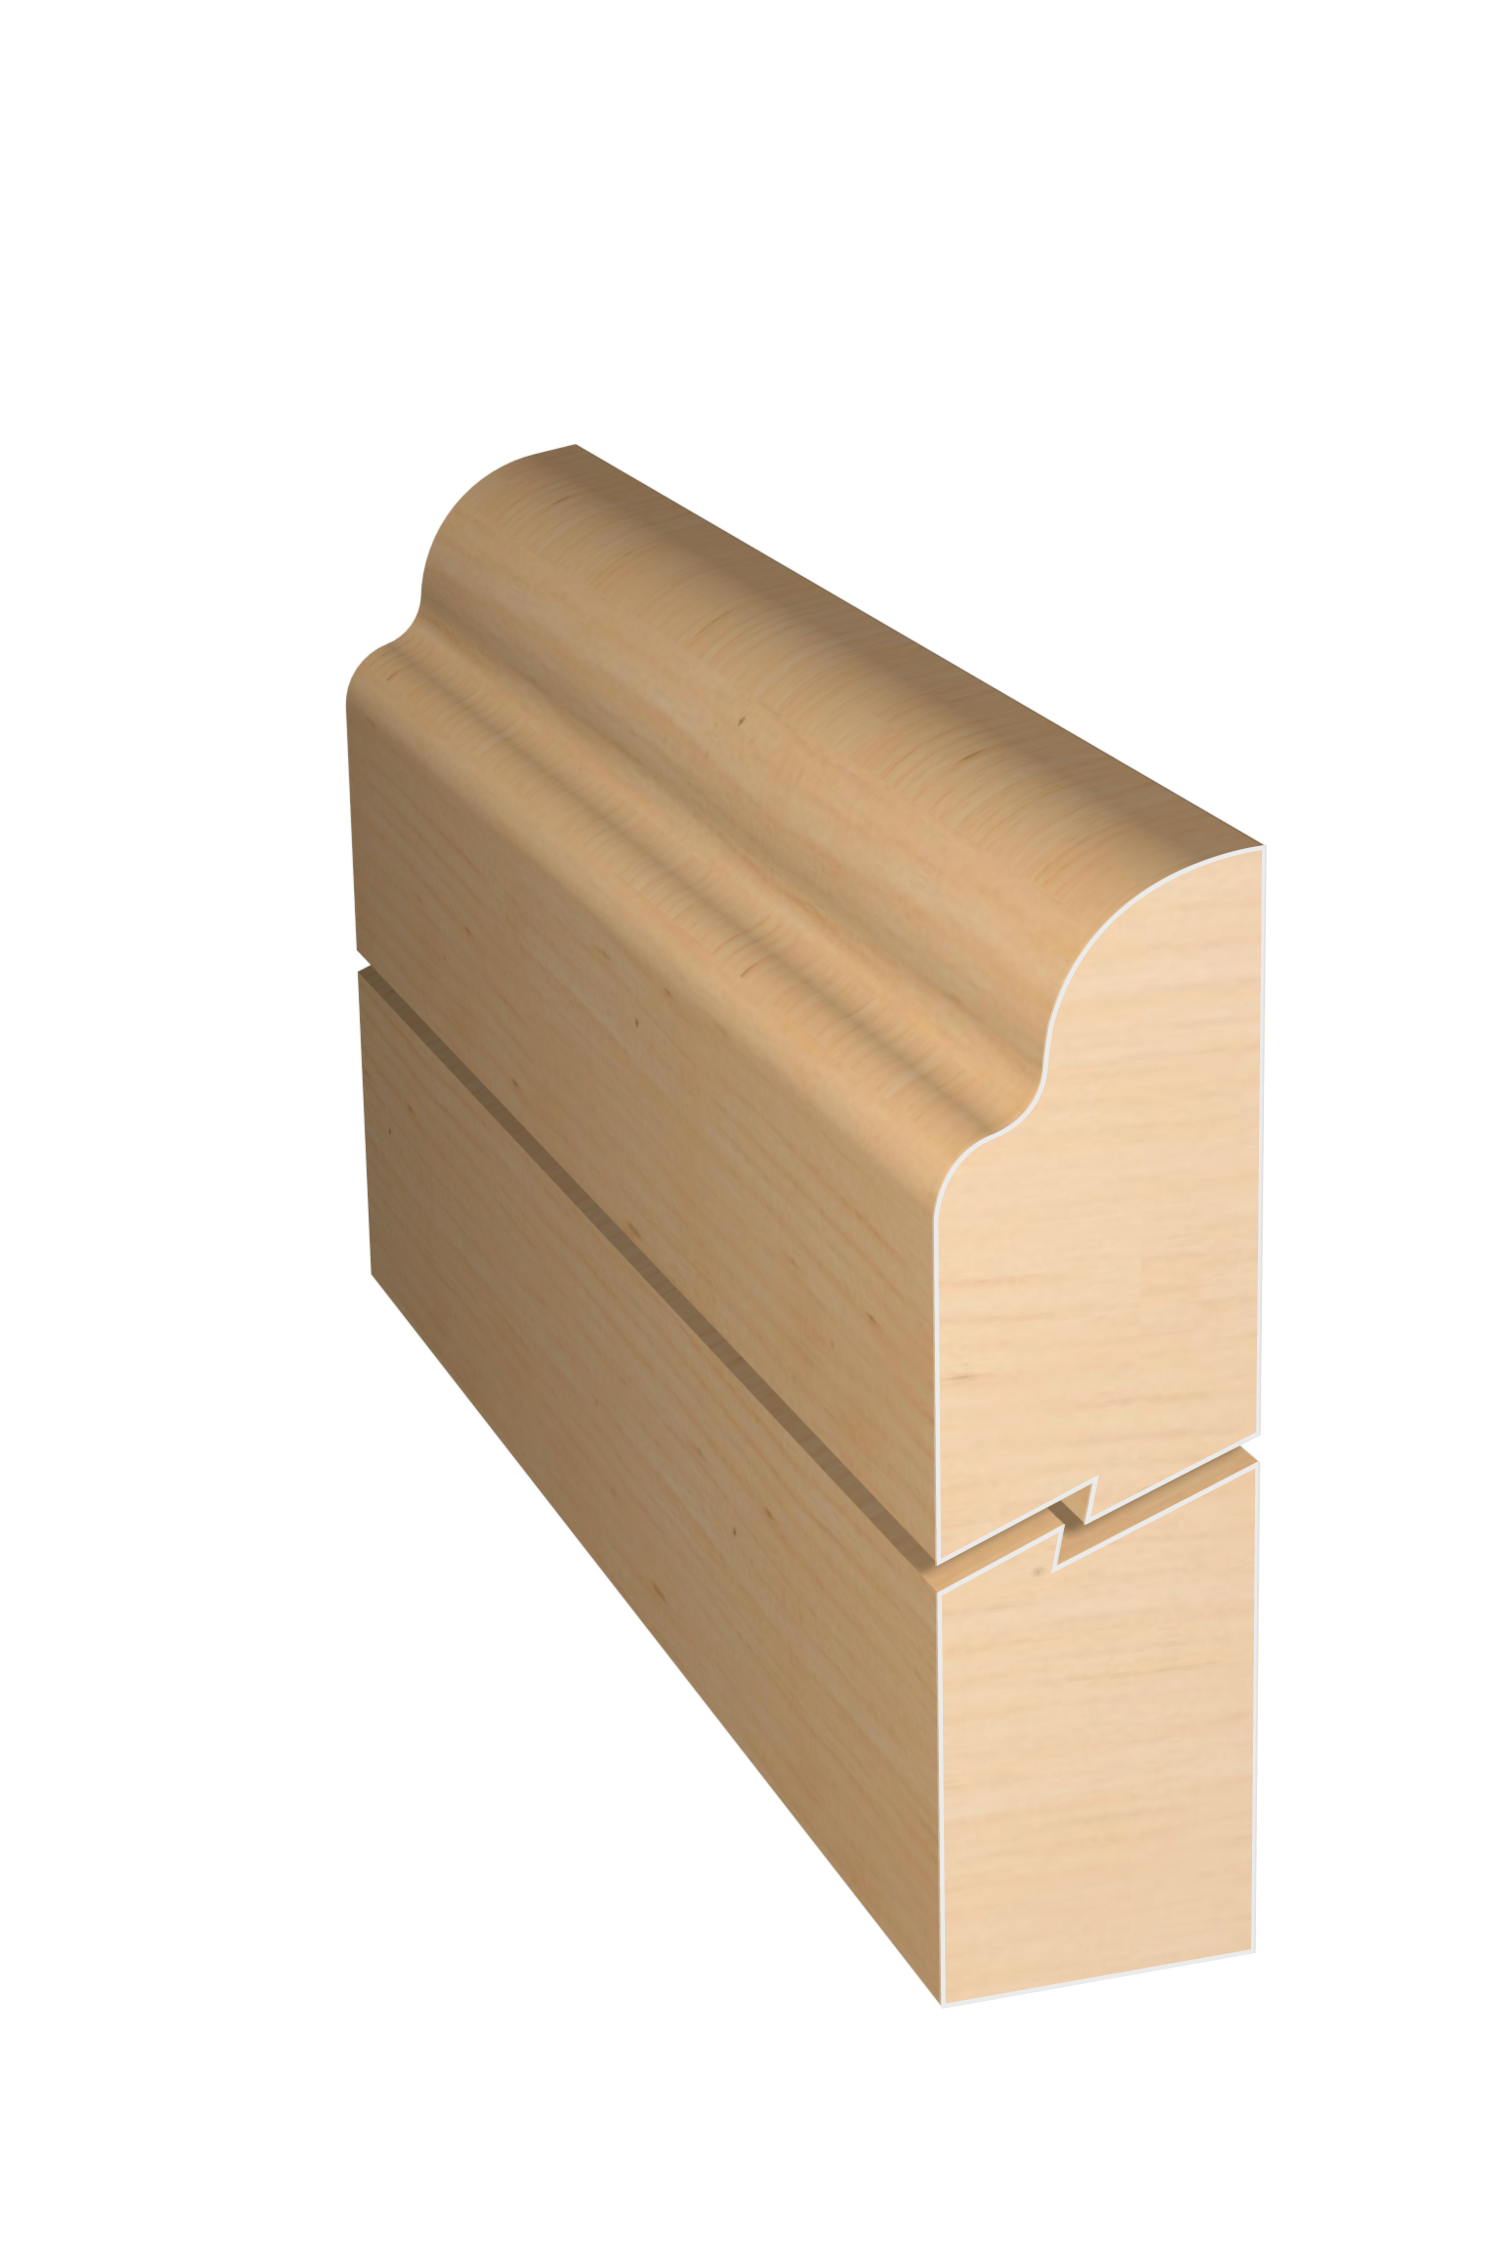 Three dimensional rendering of custom edge profile wood molding SKPL12 made by Public Lumber Company in Detroit.